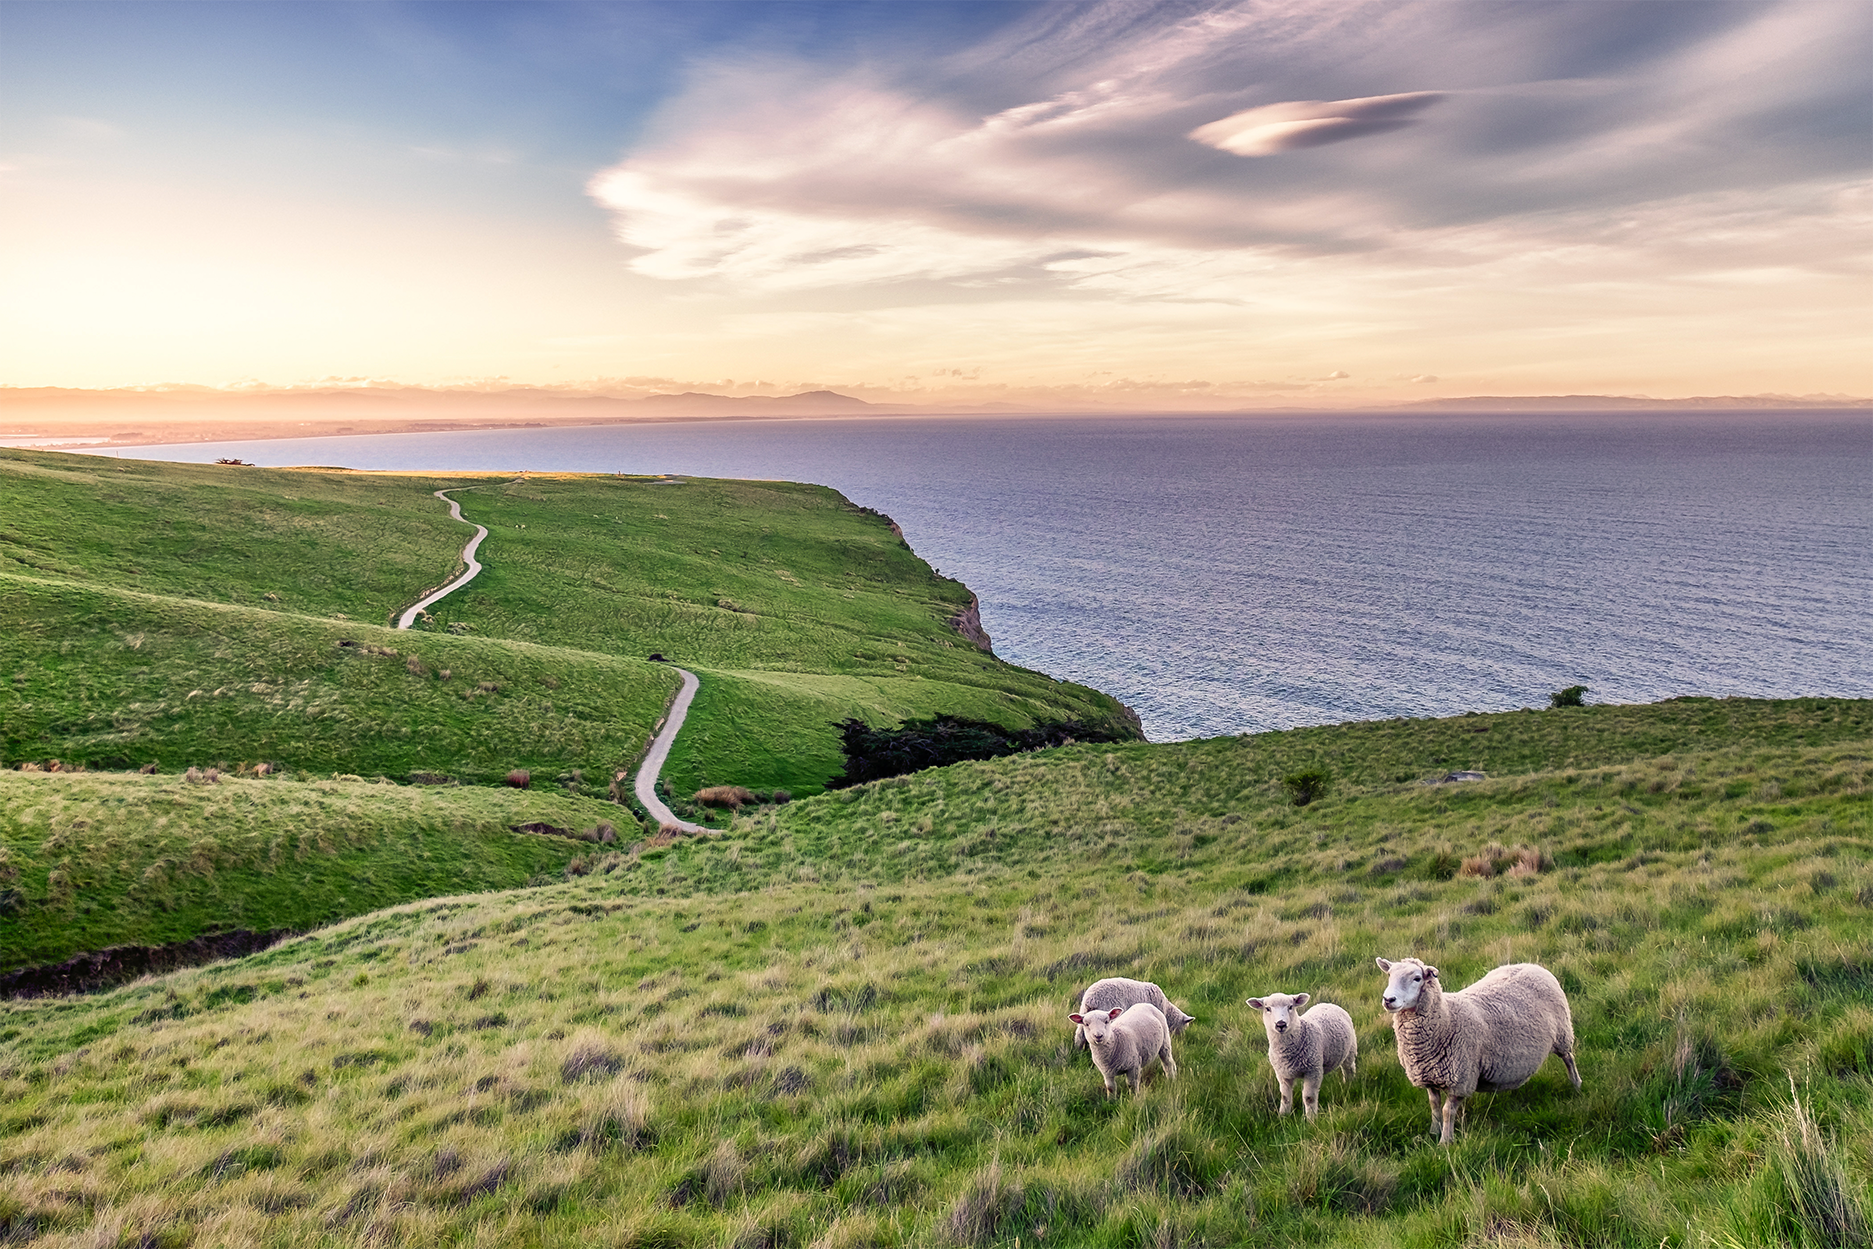 sheep on a cliff with the ocean in the background